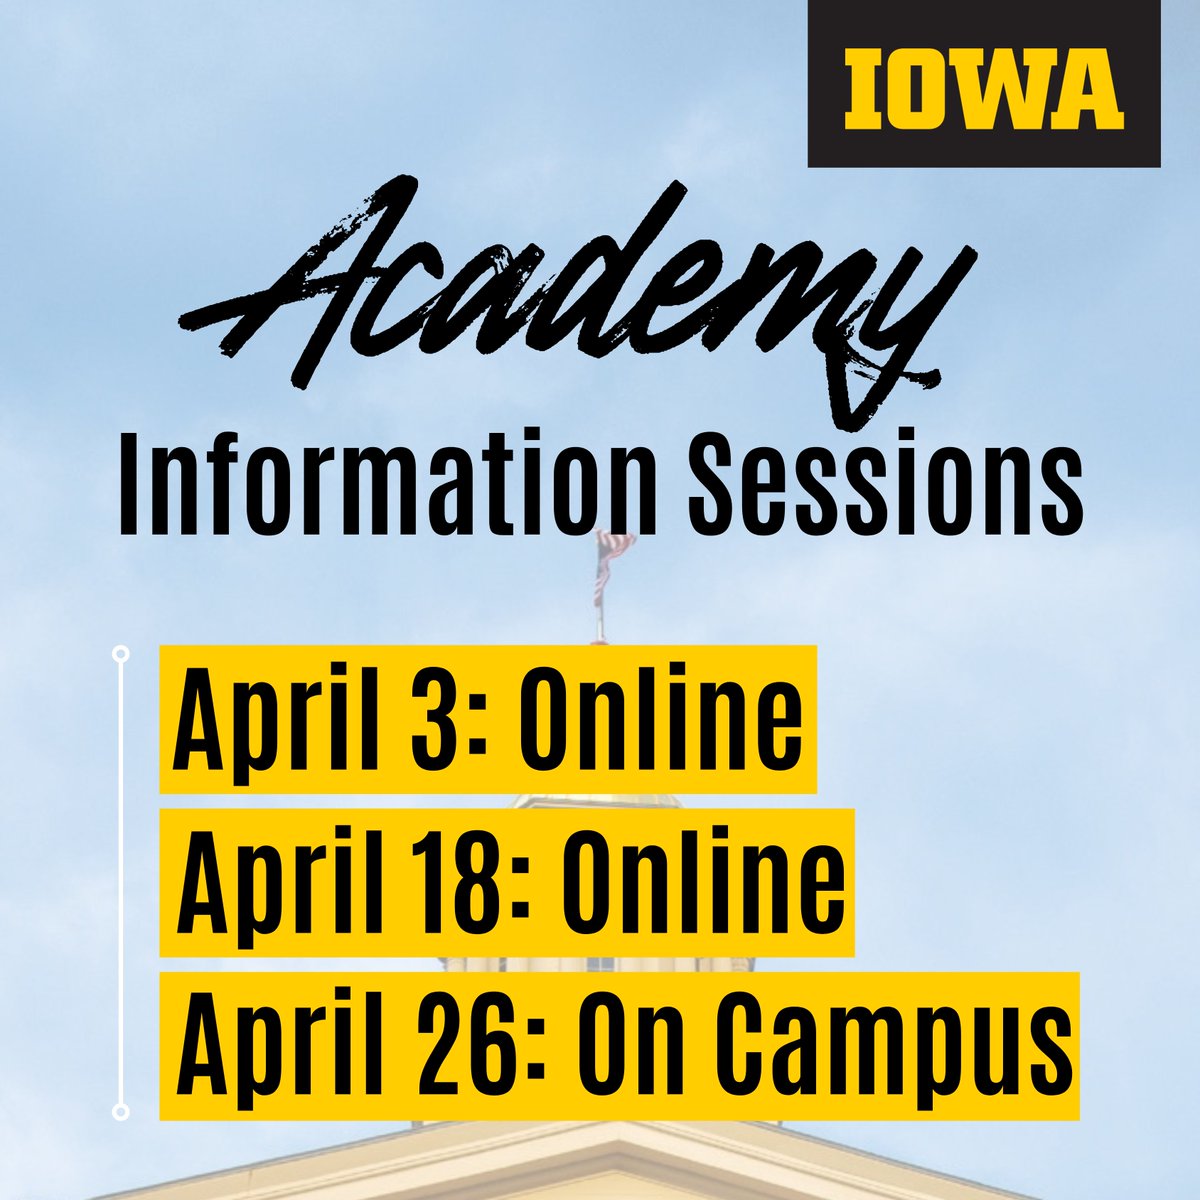 Are you interested in learning more about the Bucksbaum Early Entrance Academy or the Academy for Twice-Exceptionality? We are hosting free information sessions on April 3, April 18, and April 26. Visit belinblank.org/academy/ and belinblank.org/2eacademy/ for more information!